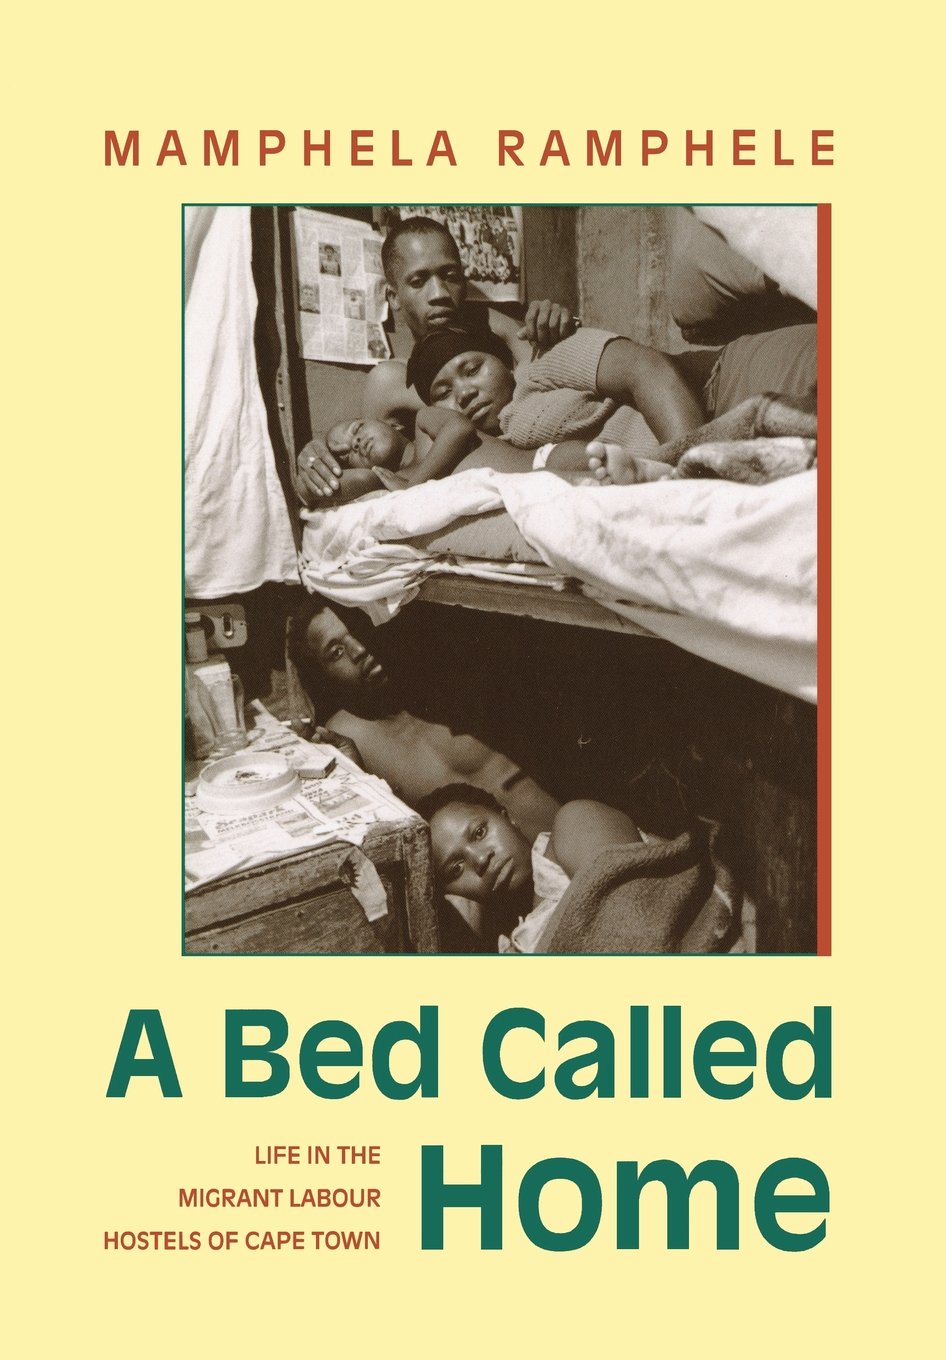 A Bed Called Home - Life In The Migrant Labour Hostels Of Cape Town (1993)